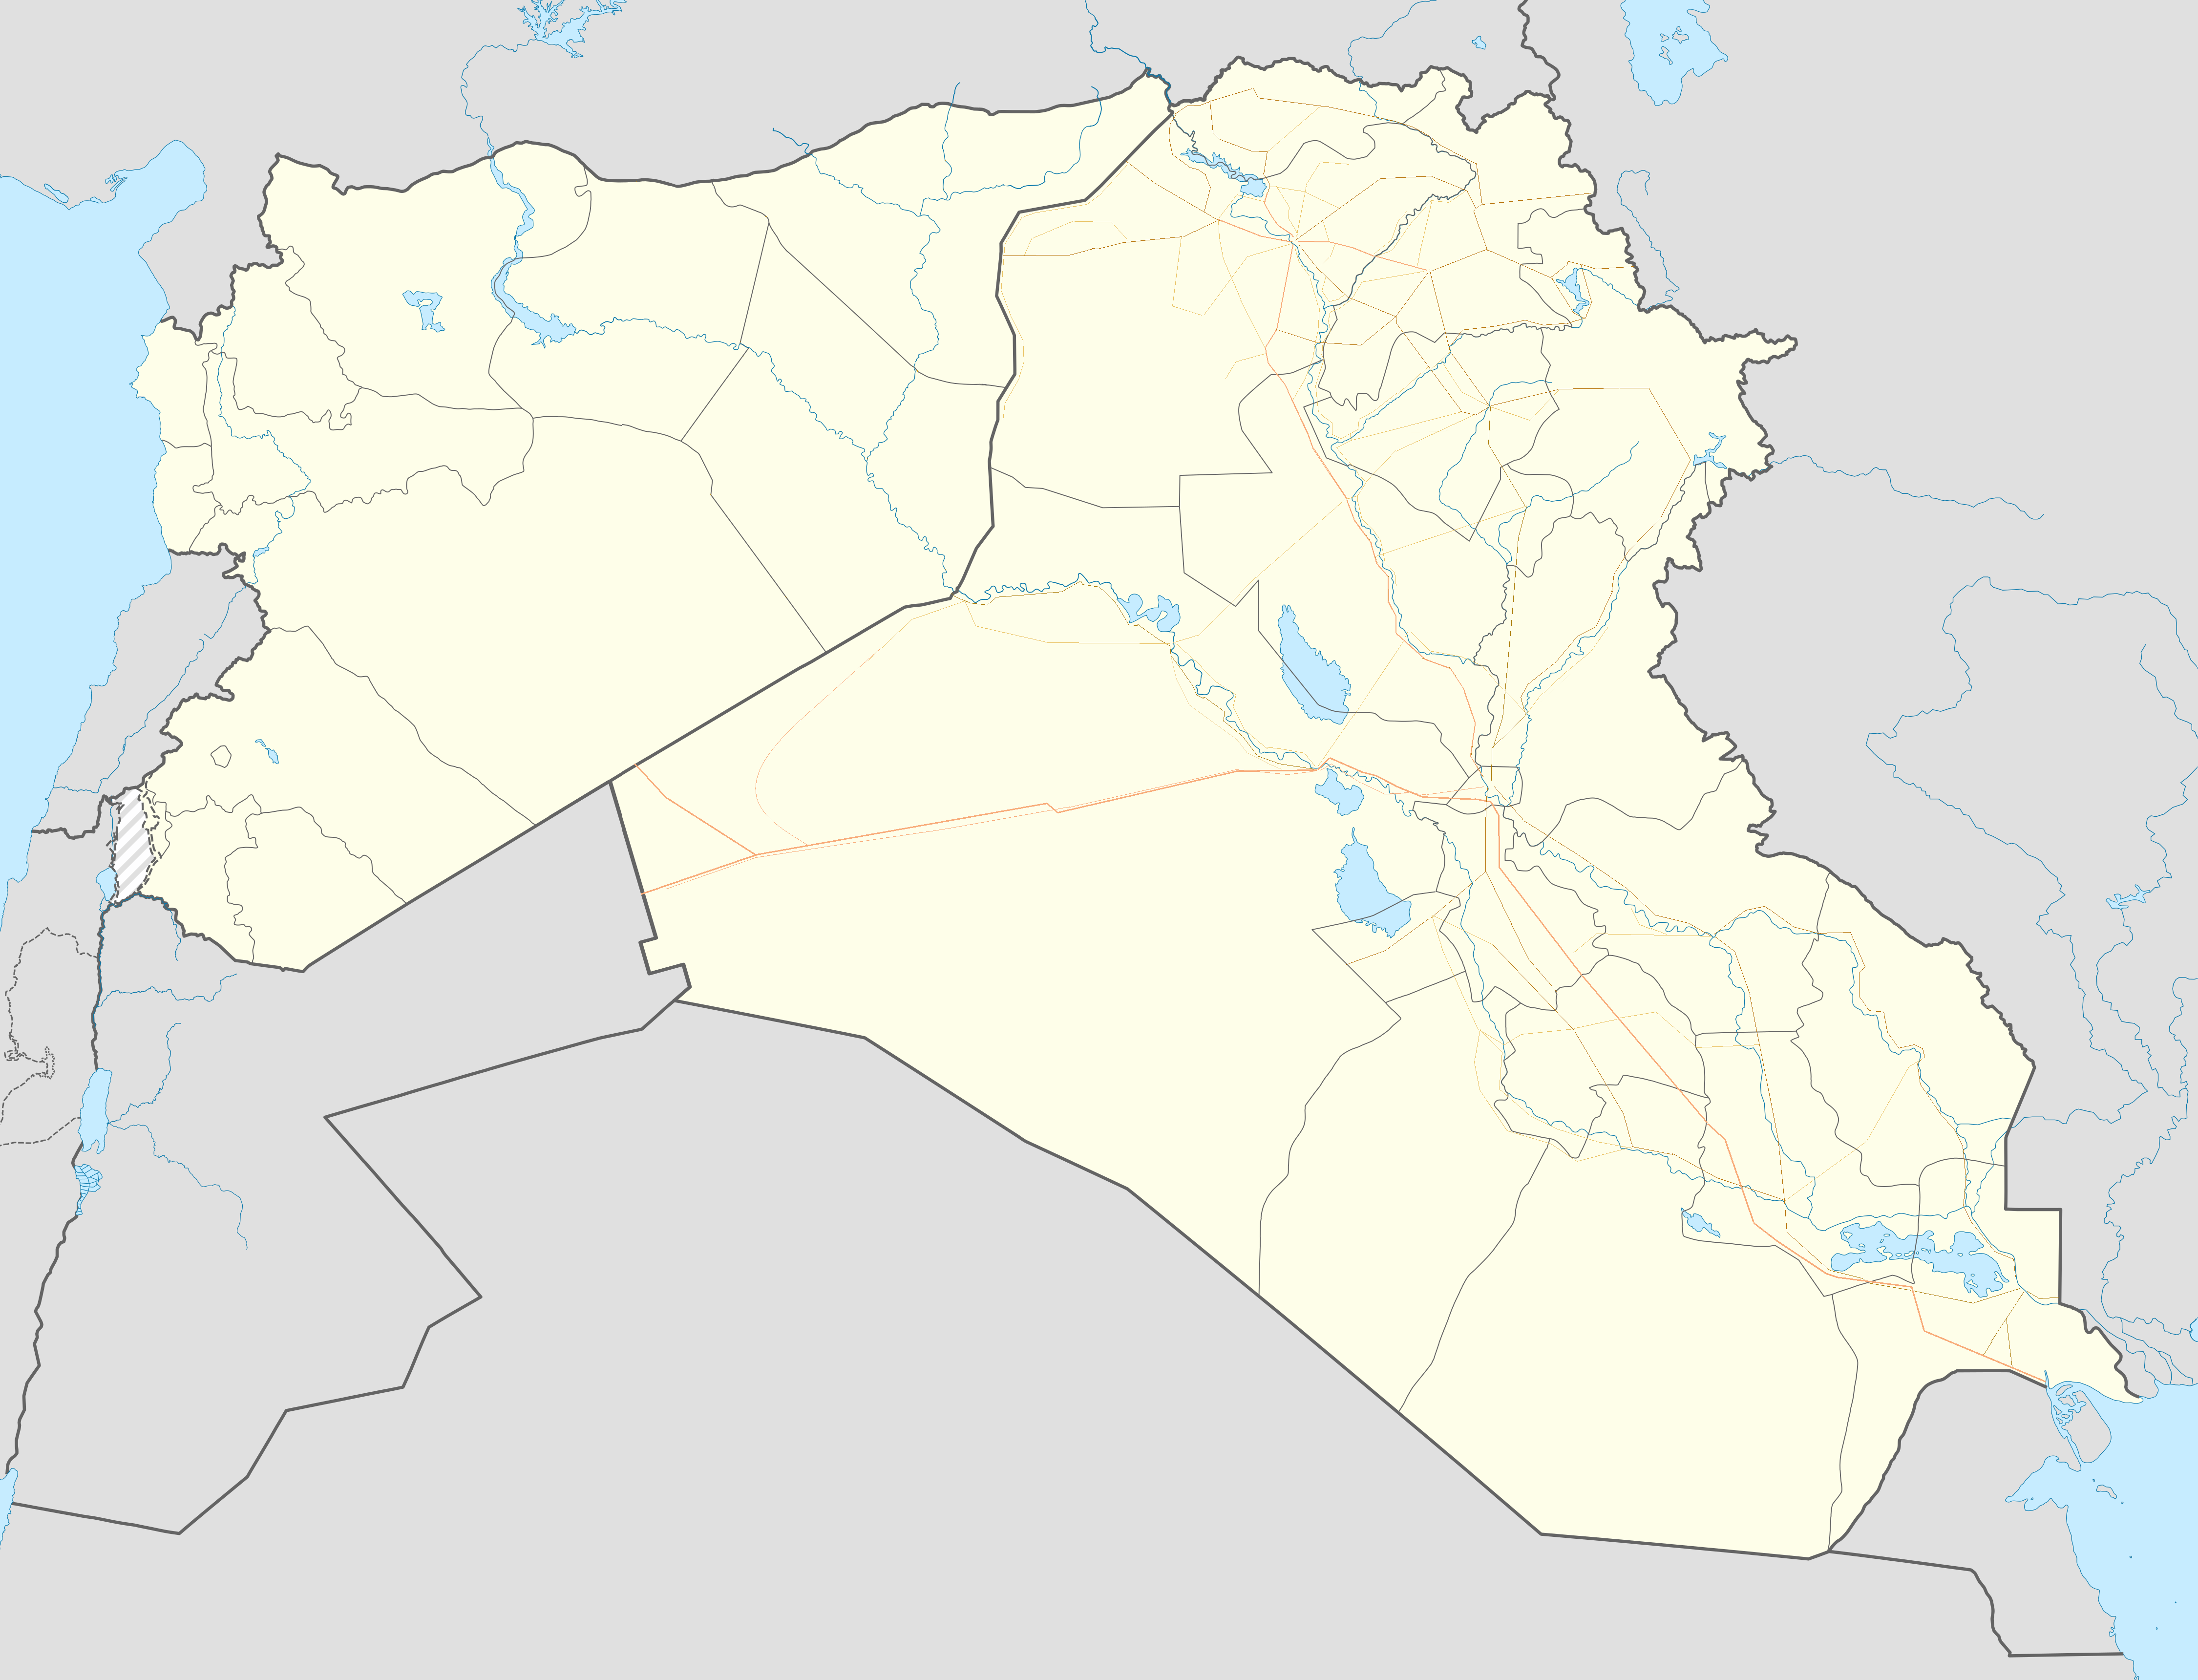 Syrian and Iraqi insurgency detailed map is located in Syria-Iraq